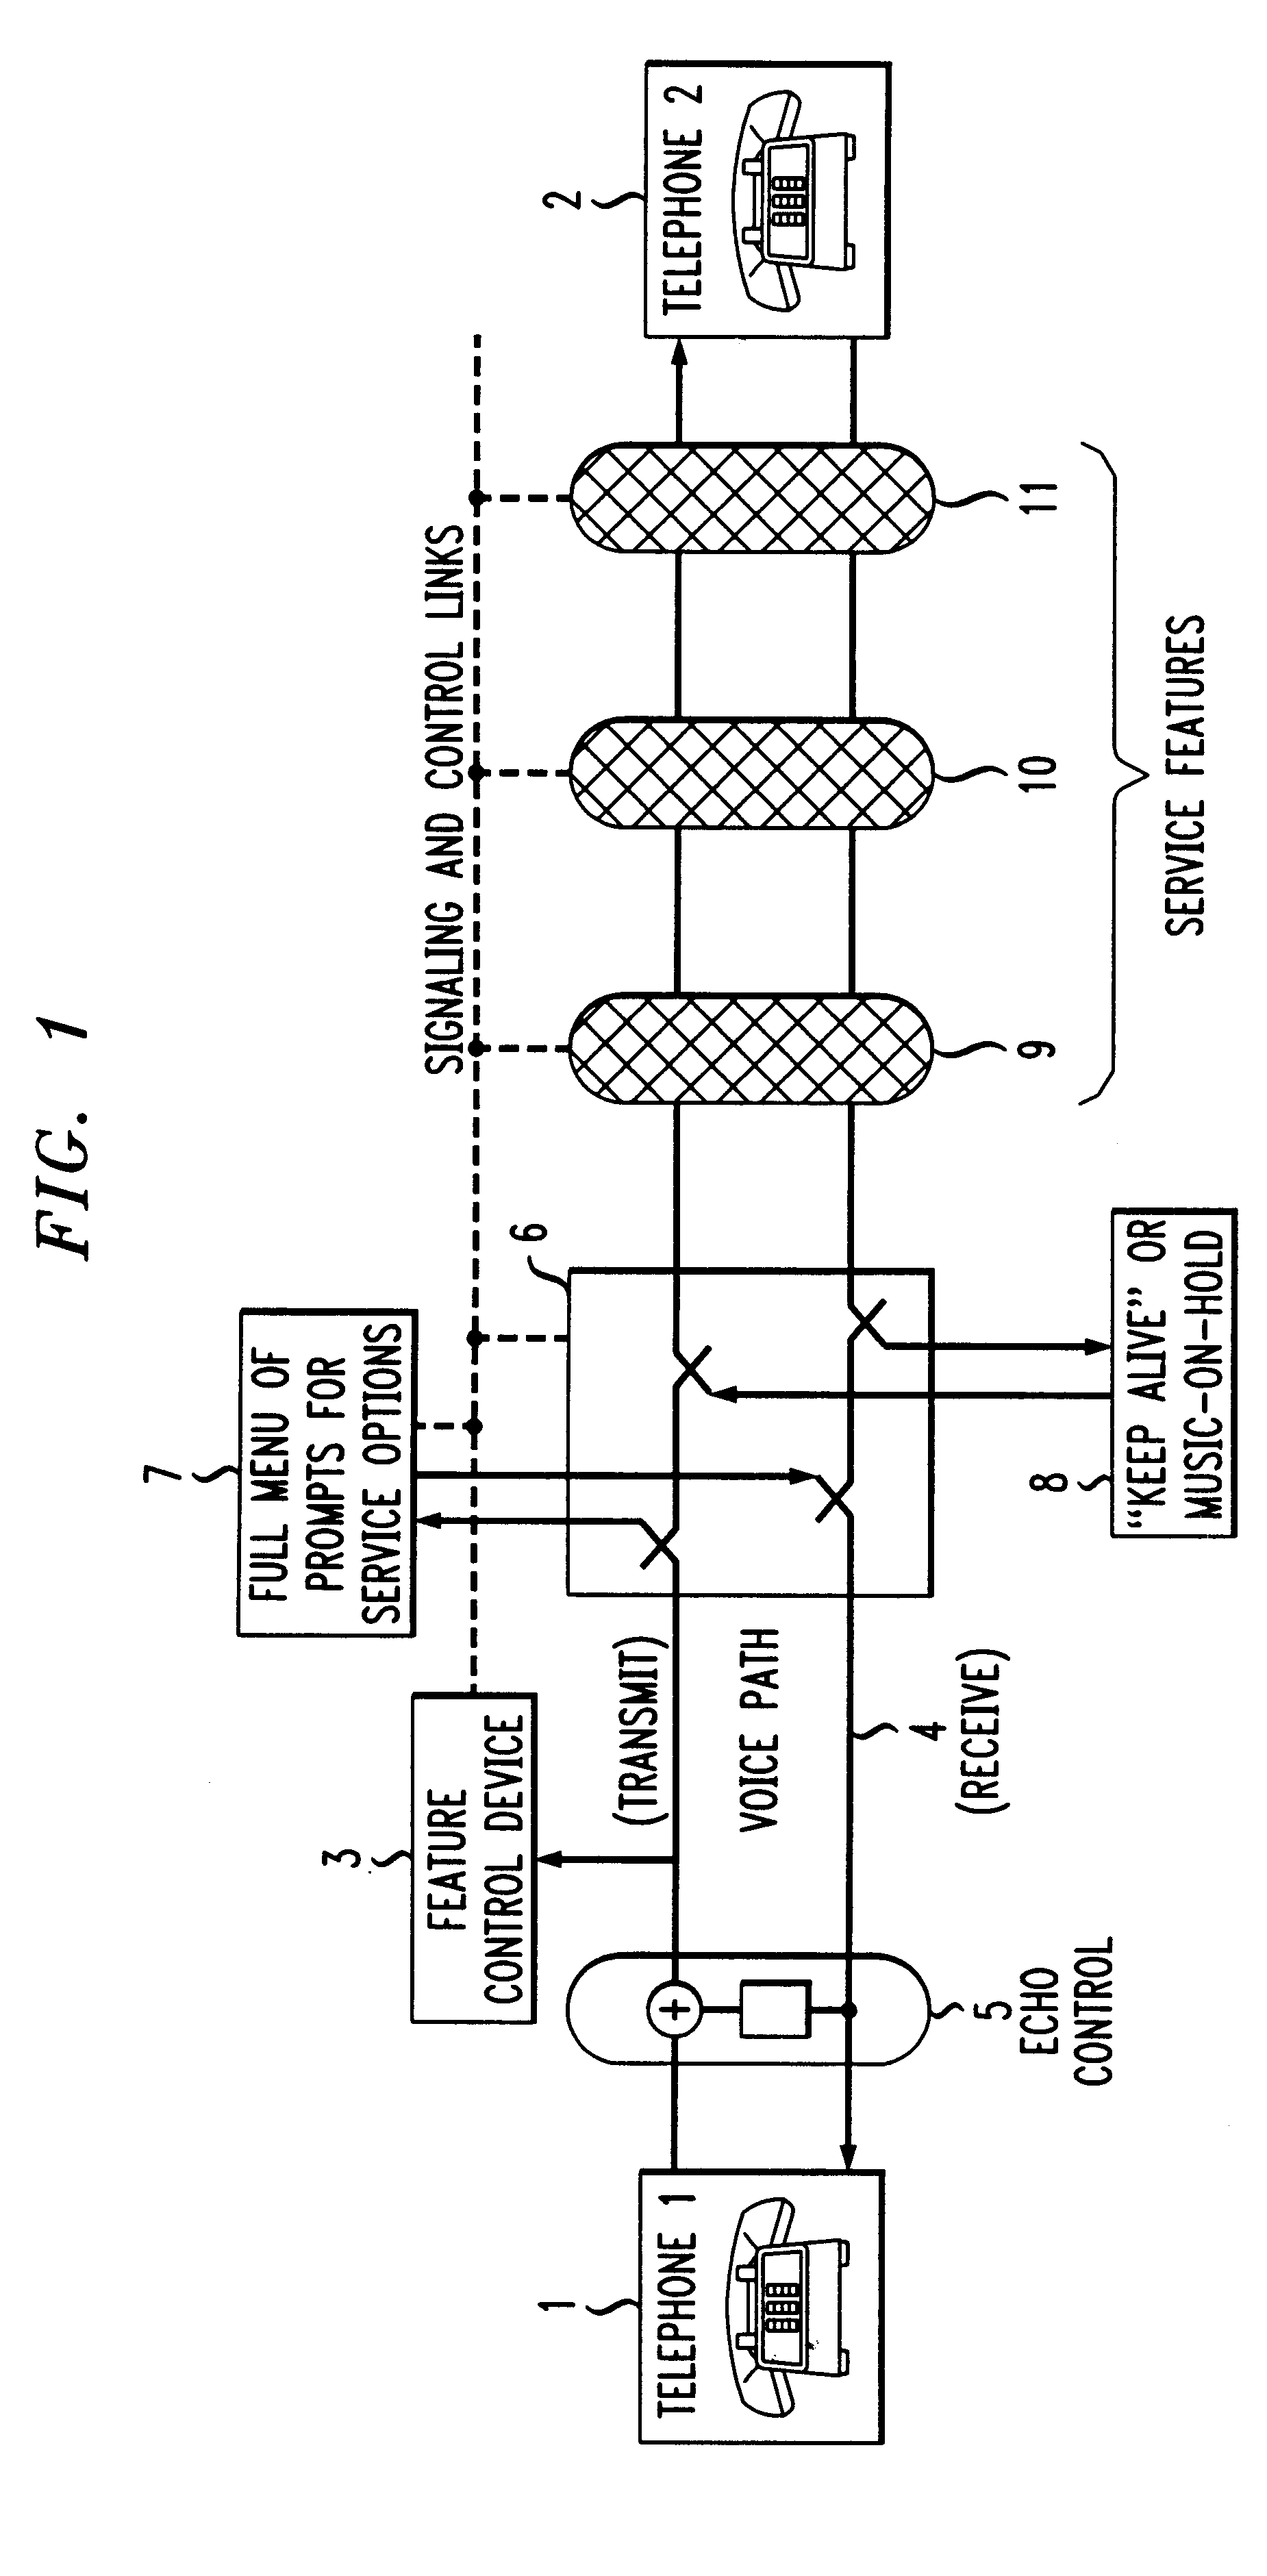 Billing method for customers having IP telephony service with multiple levels of security